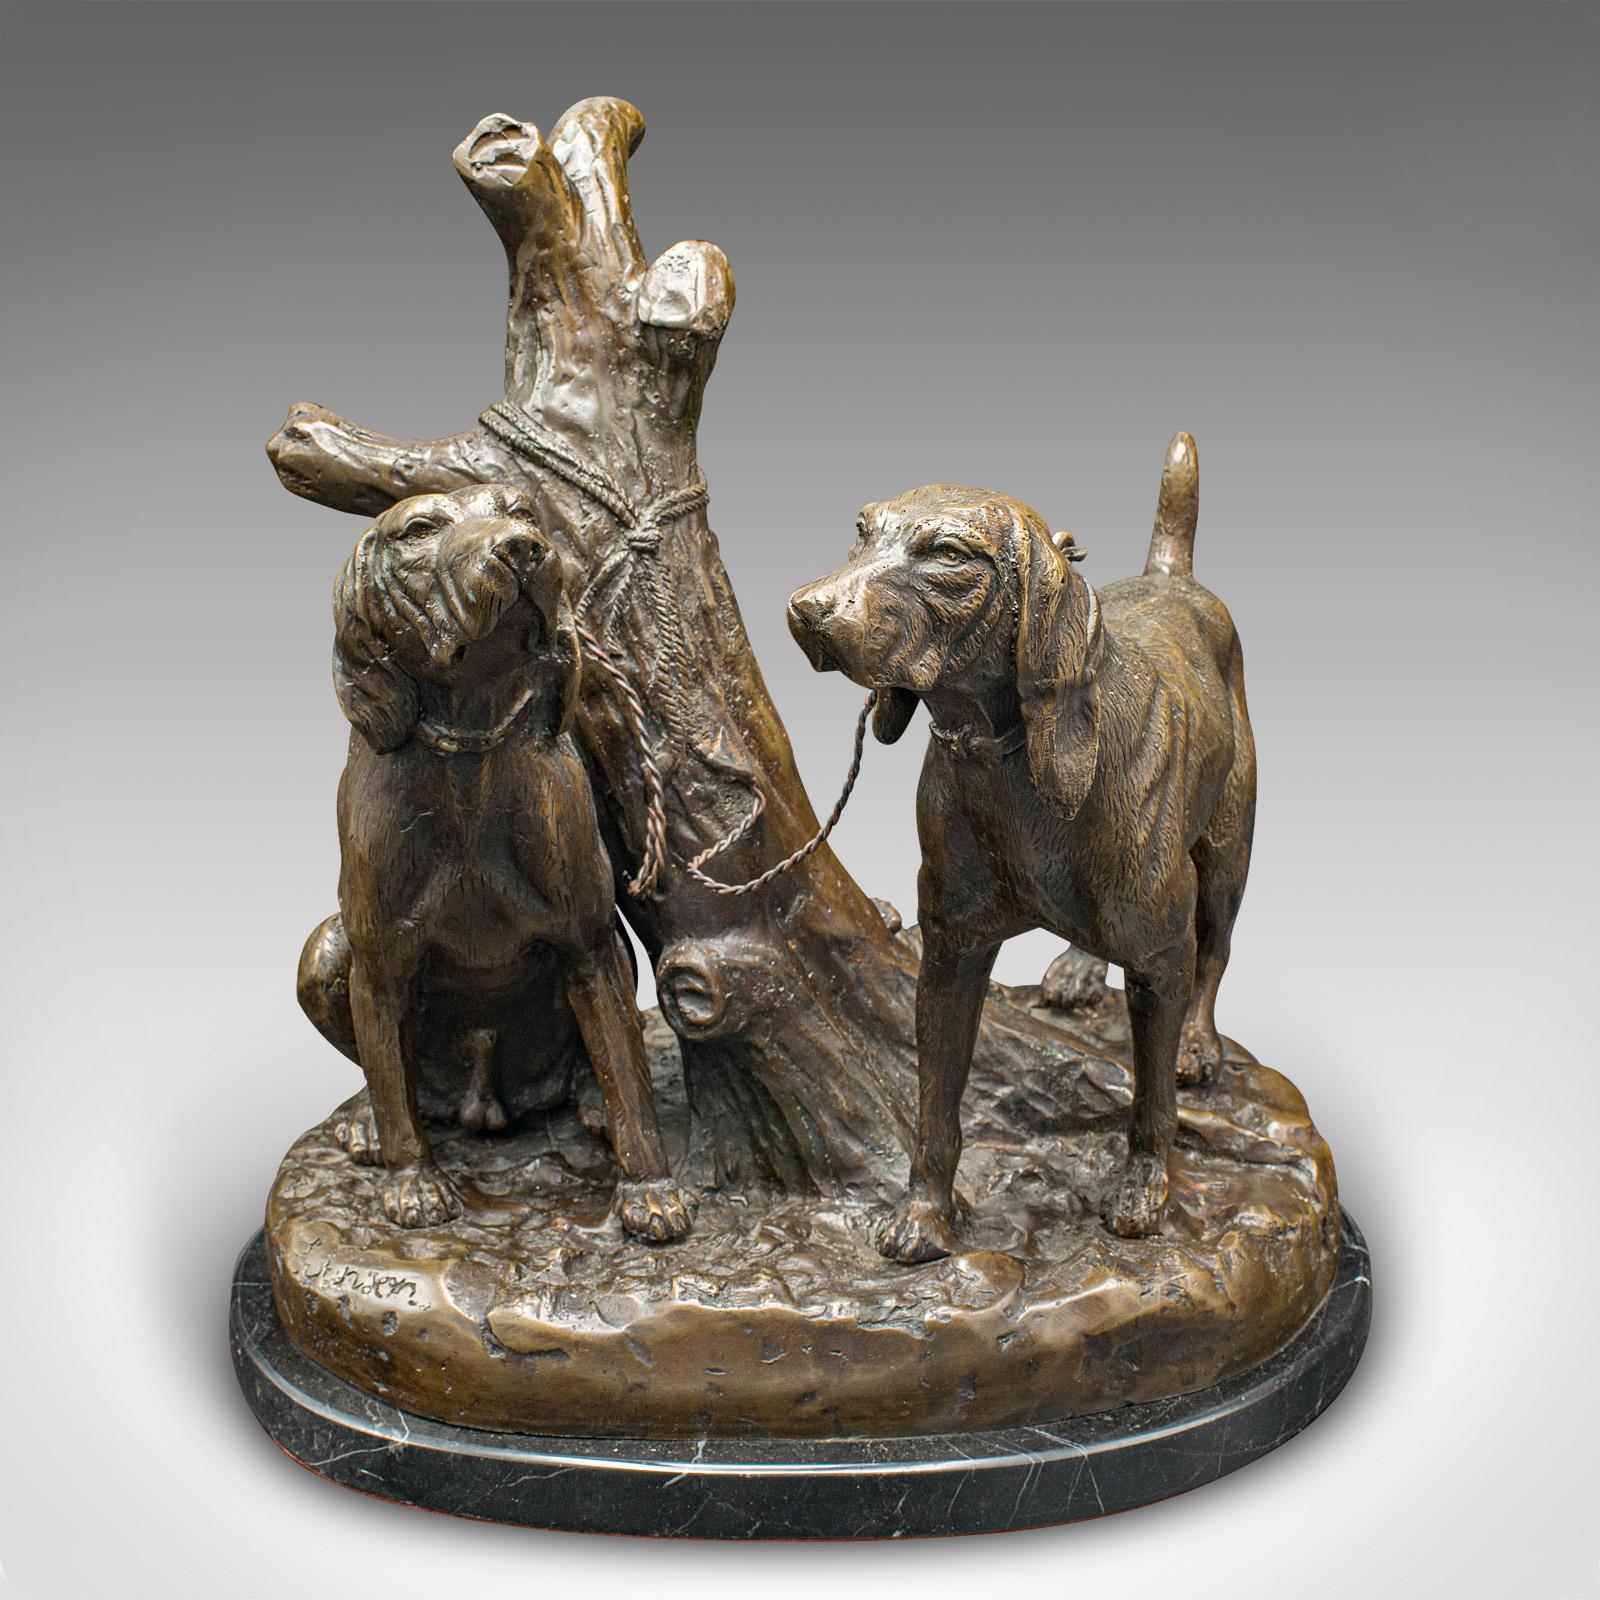 This is a heavy vintage bloodhound ornament. An American, bronze and marble figural dog sculpture by Grace Mott Johnson, dating to the mid 20th century, circa 1950.

Delightfully substantial ornament with high appeal for dog lovers
Displays a